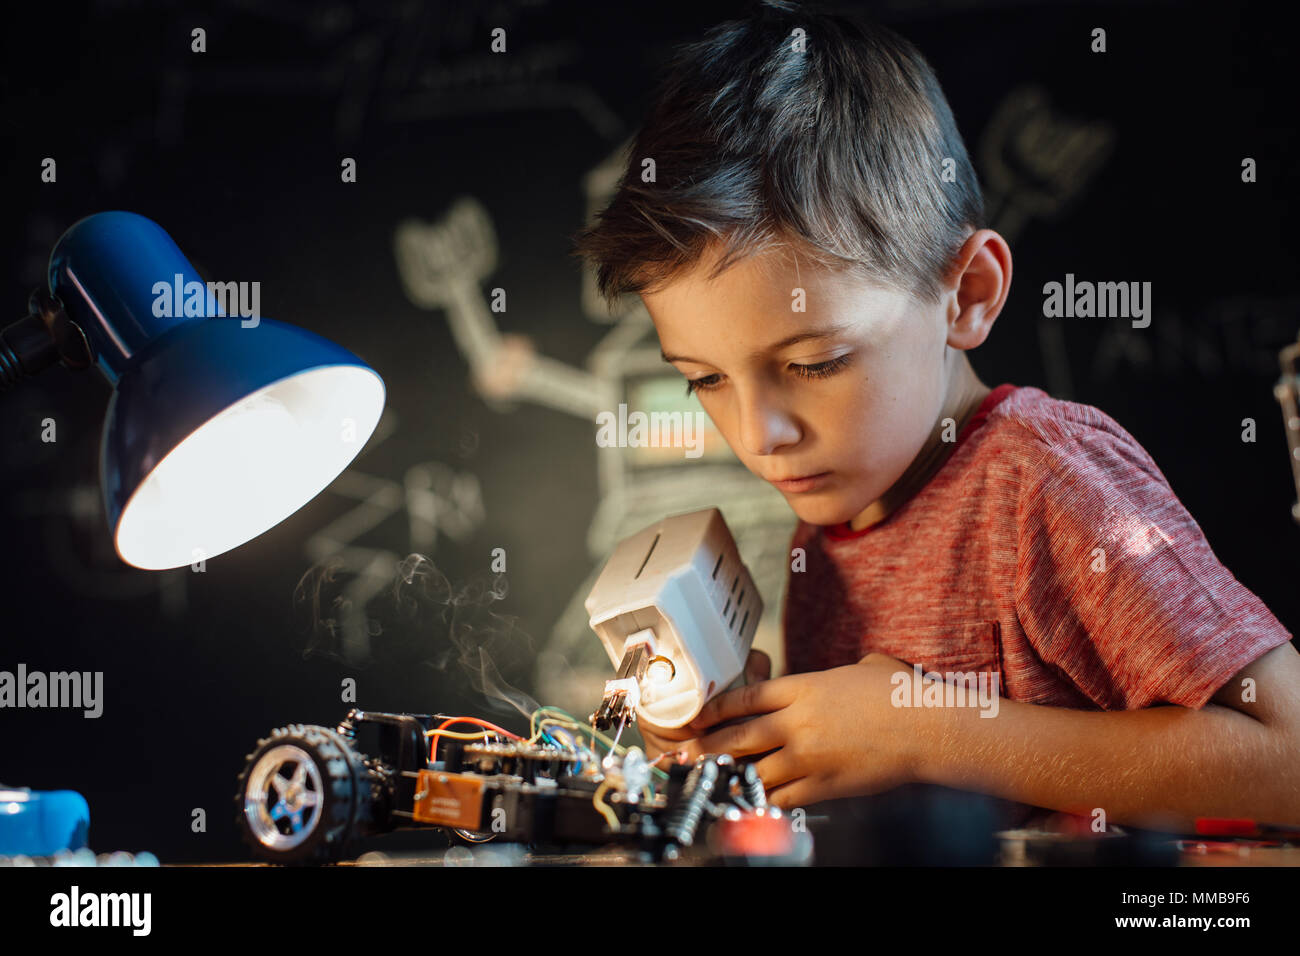 Boy enjoying his soldering hobby. Portrait of a skilled young boy working with a soldering gun. Stock Photo